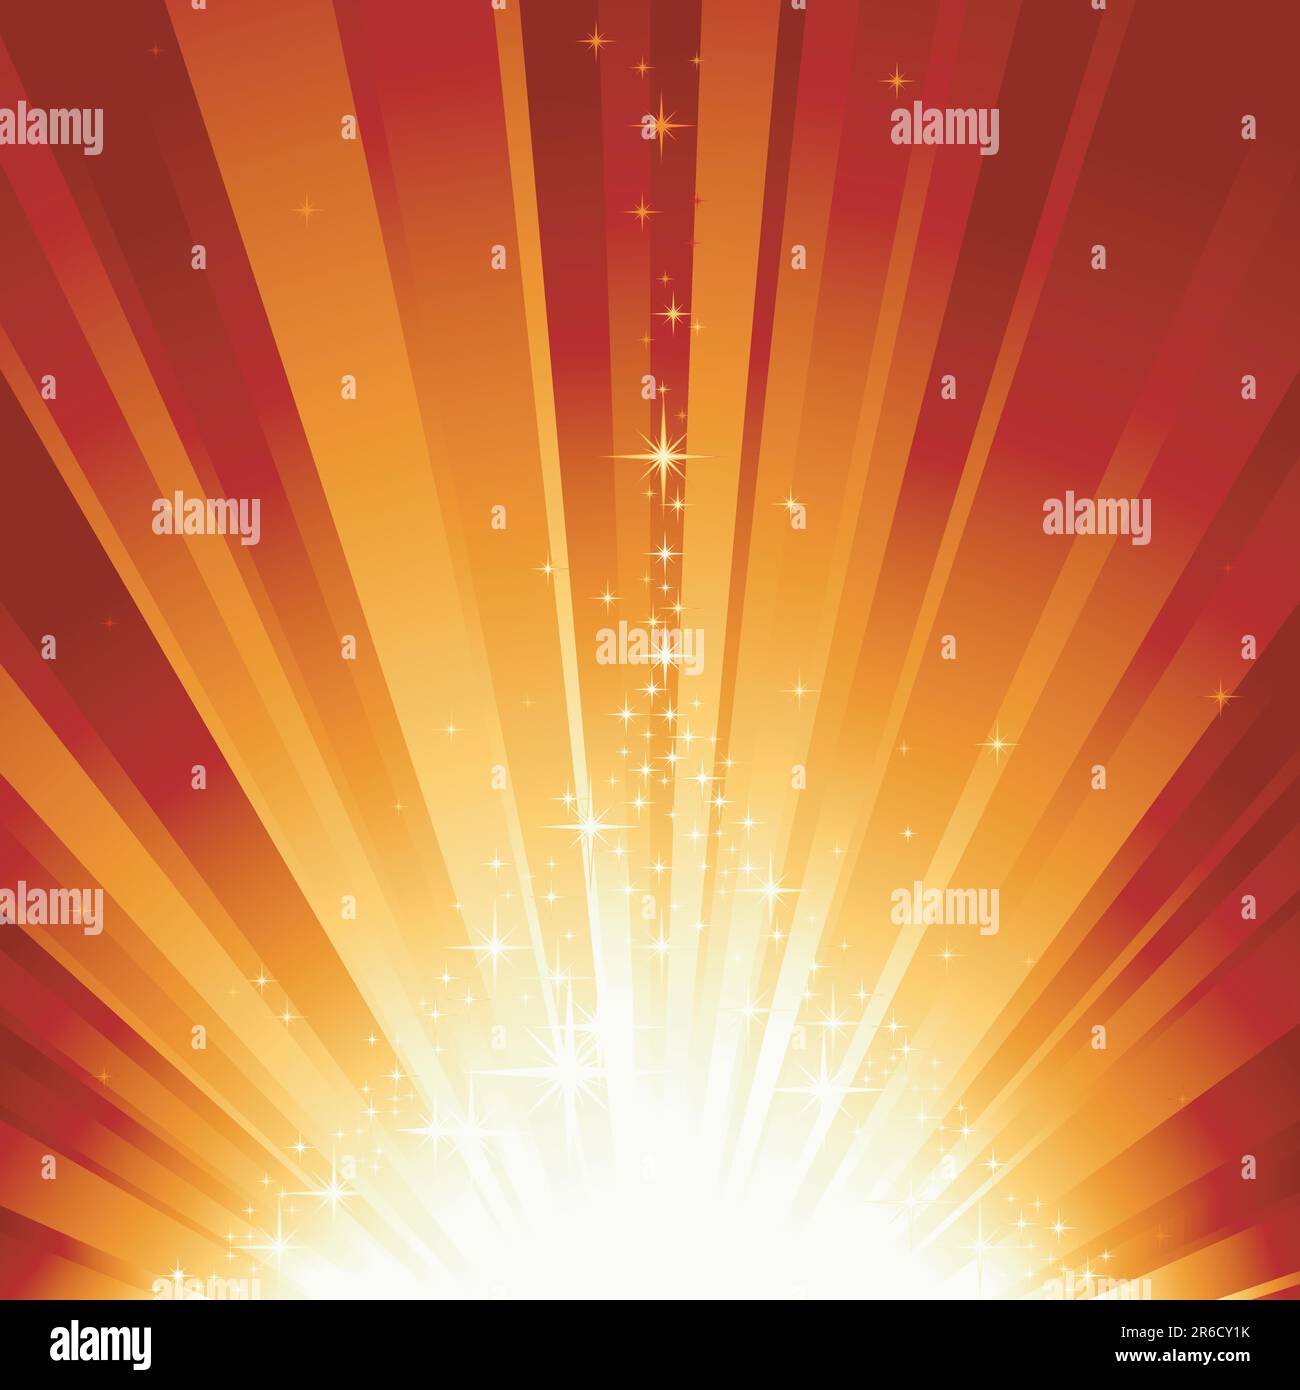 Burst of light and stars forming a stylised Christmas tree. 7 global colors, background controlled by 1 linear gradient. Artwork grouped and layered. Stock Vector